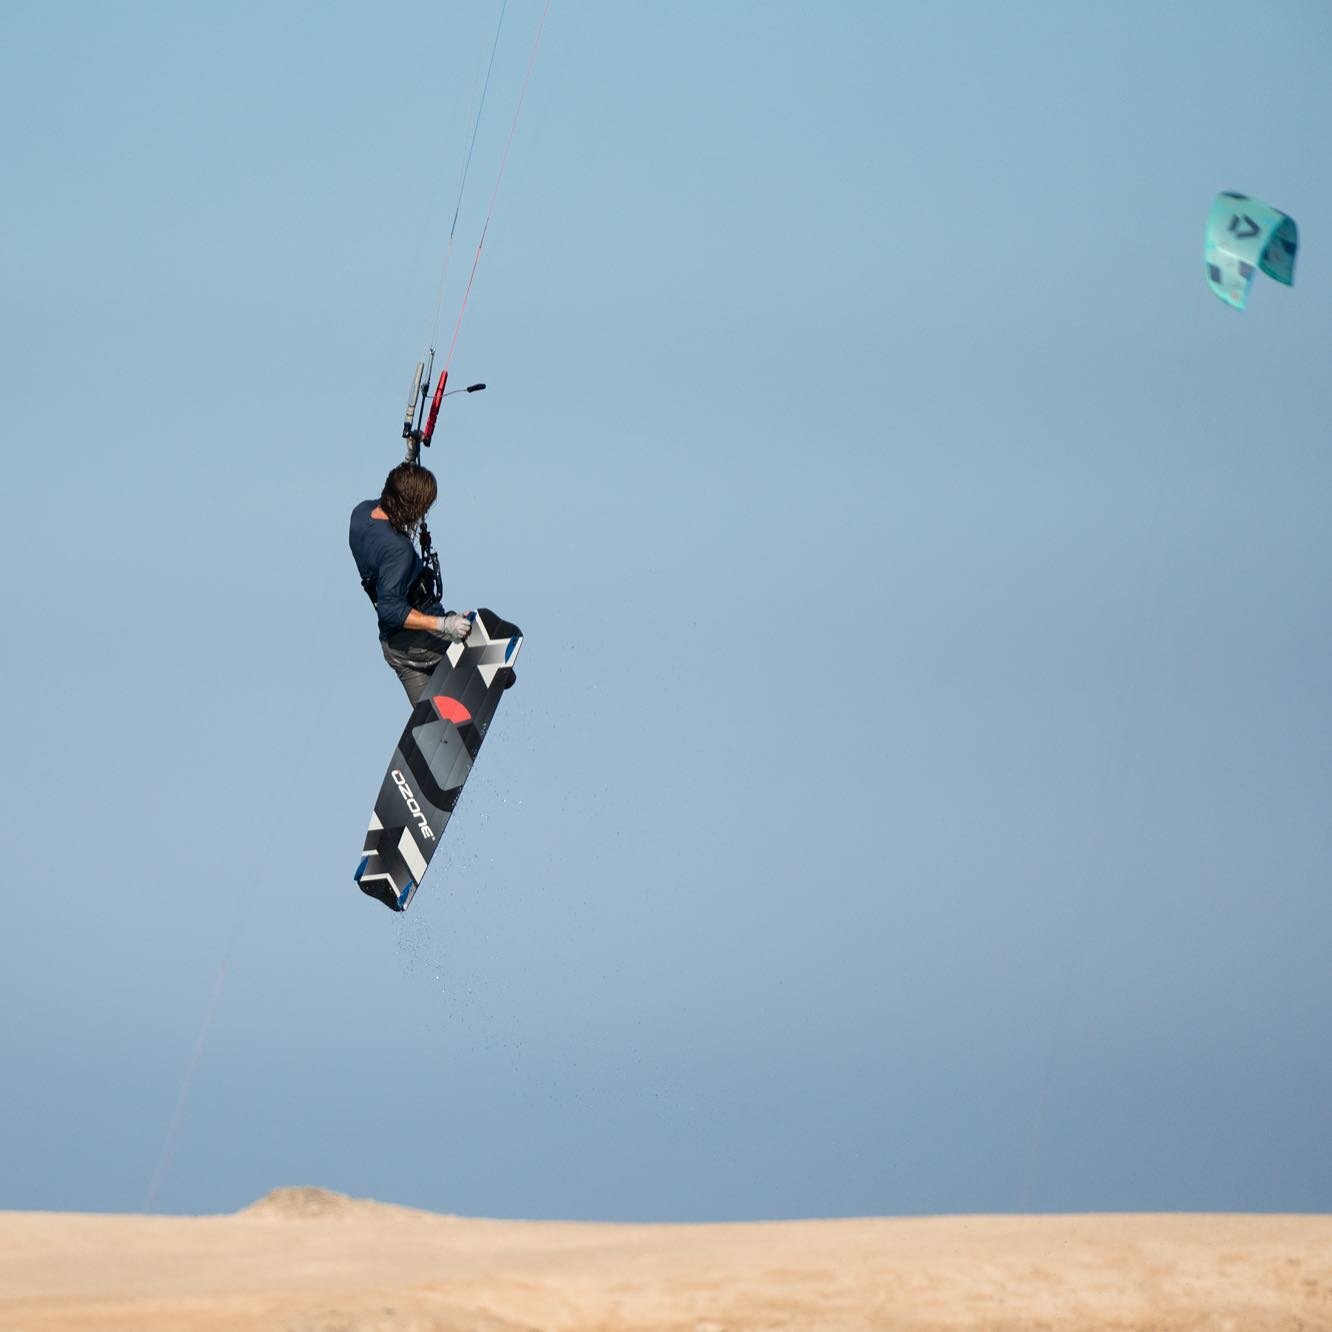 What a fun and windy last week! 
Ready for another week with an awesome group! 

#kitesurf #egypt #redsea #theriderexperience